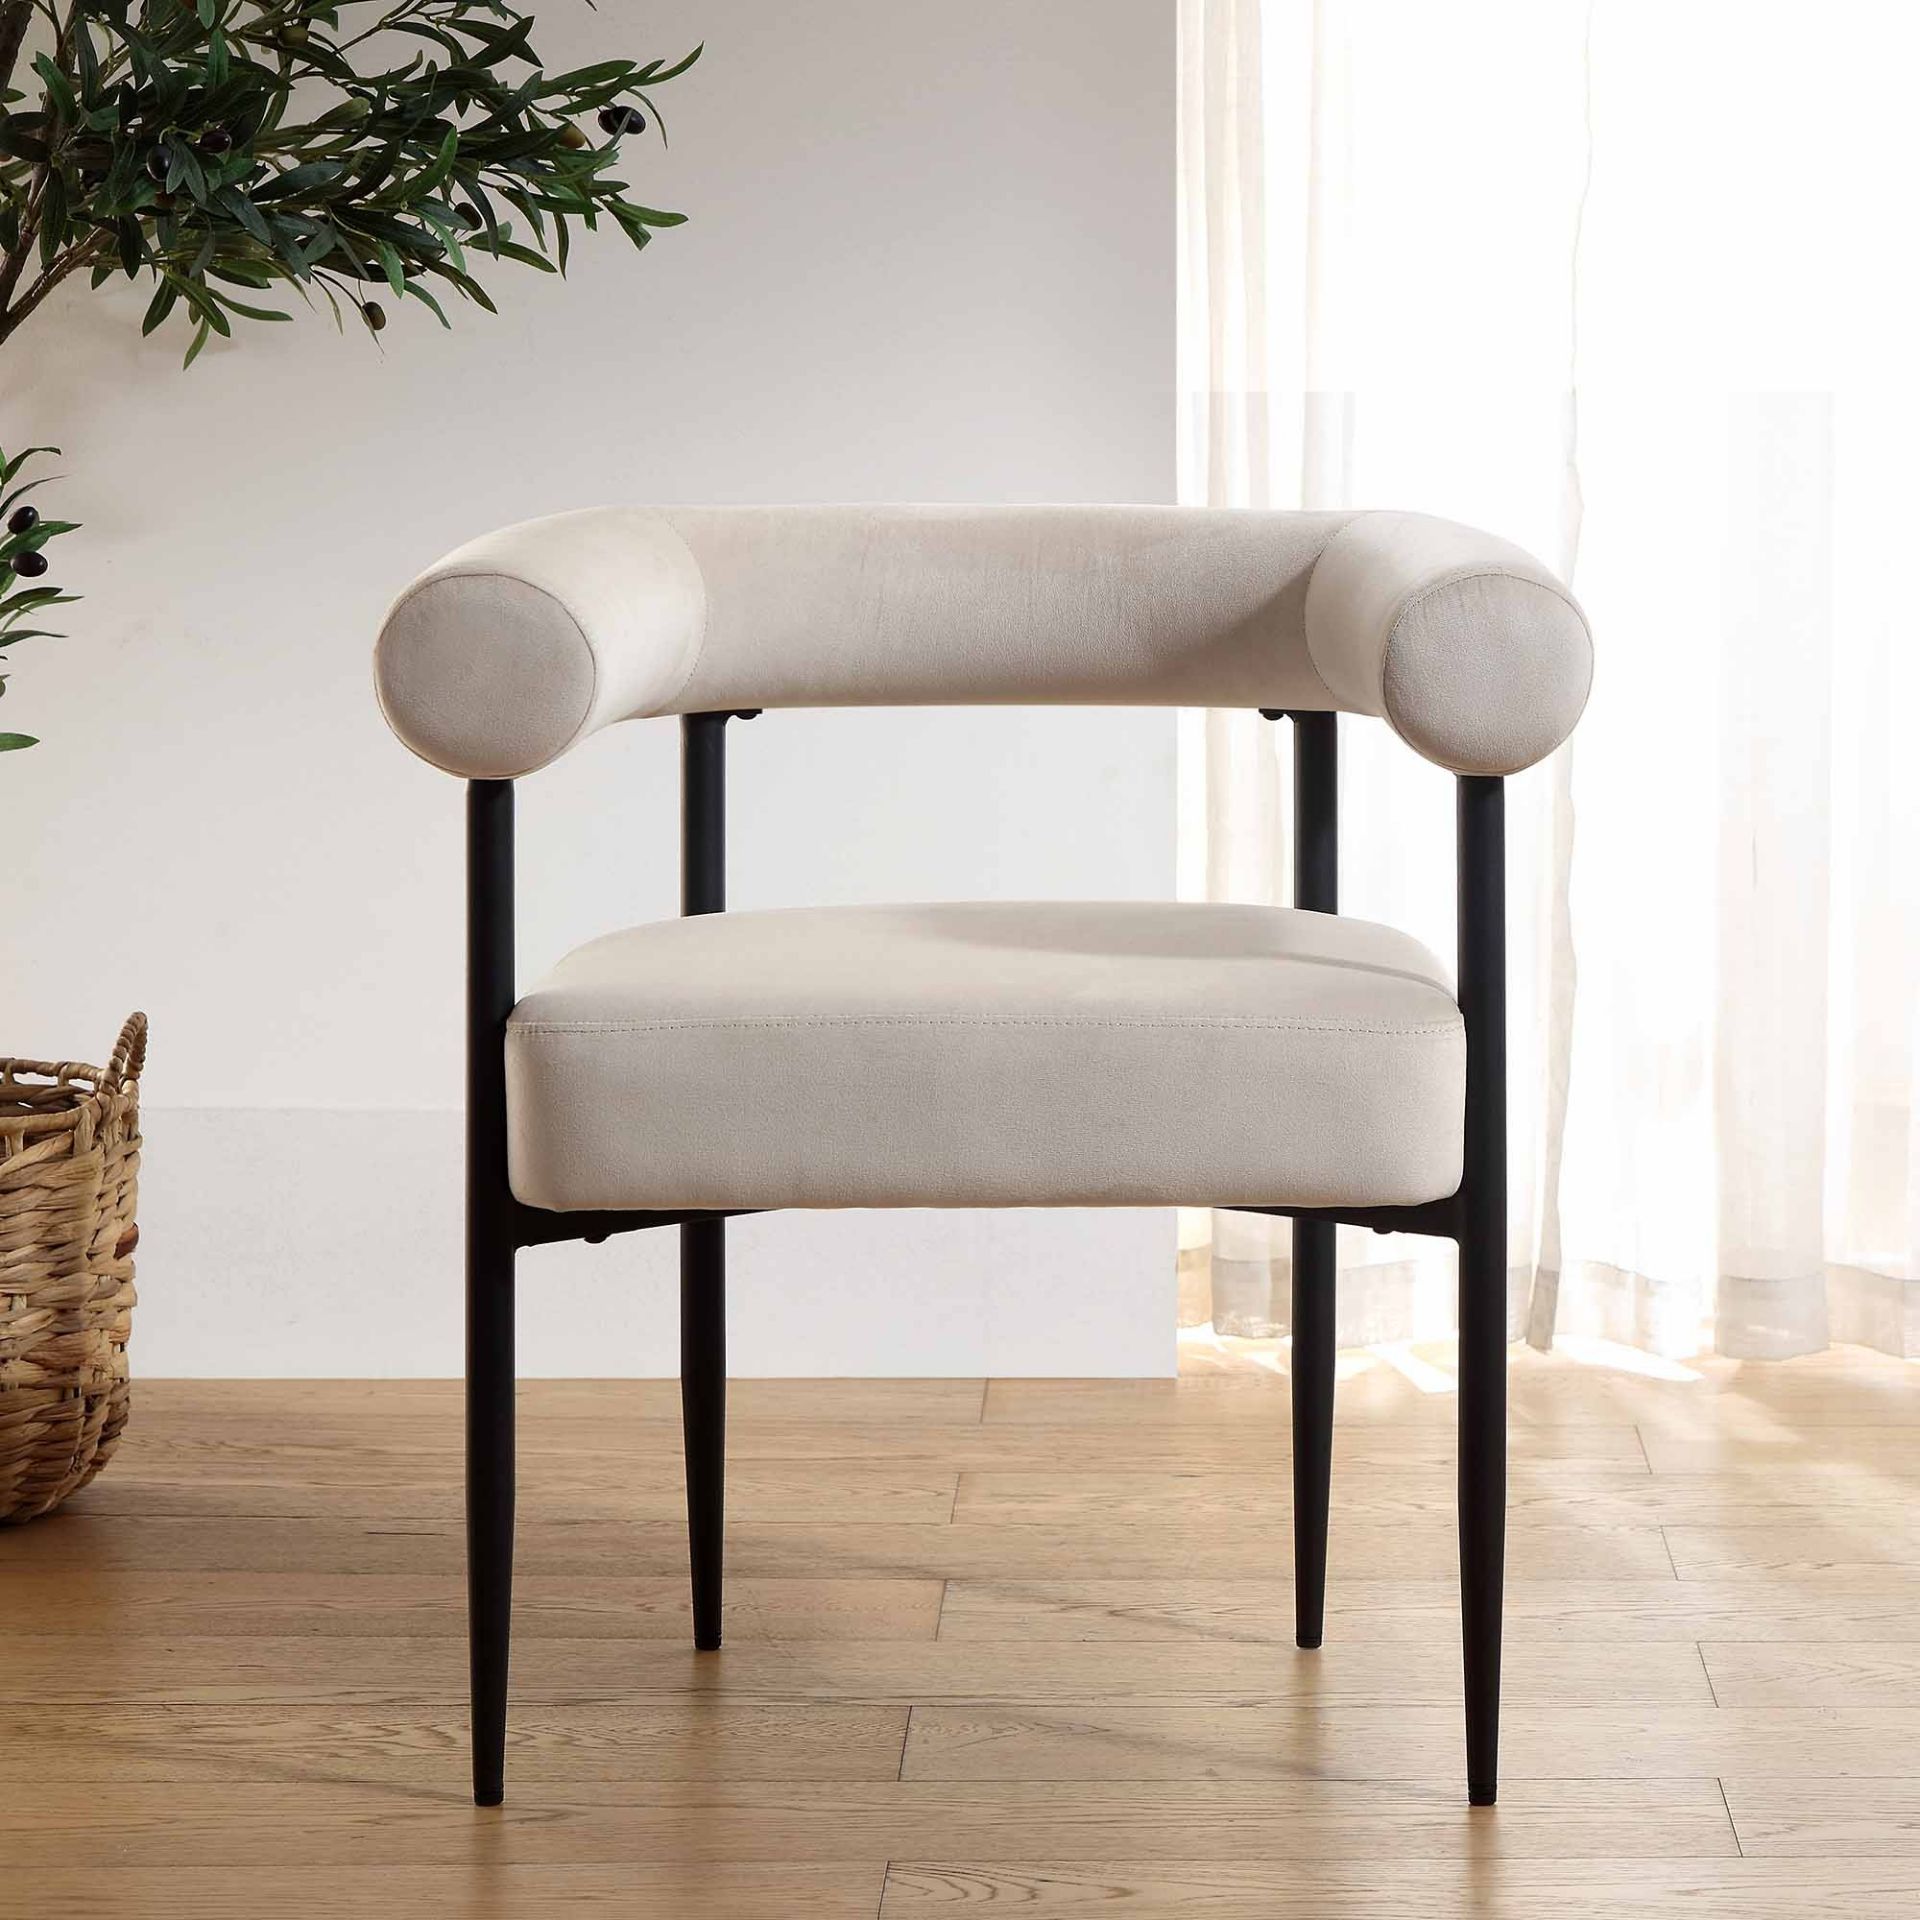 Fulbourn Champagne Velvet Dining Chair with Black Legs (R23) RRP £149.99